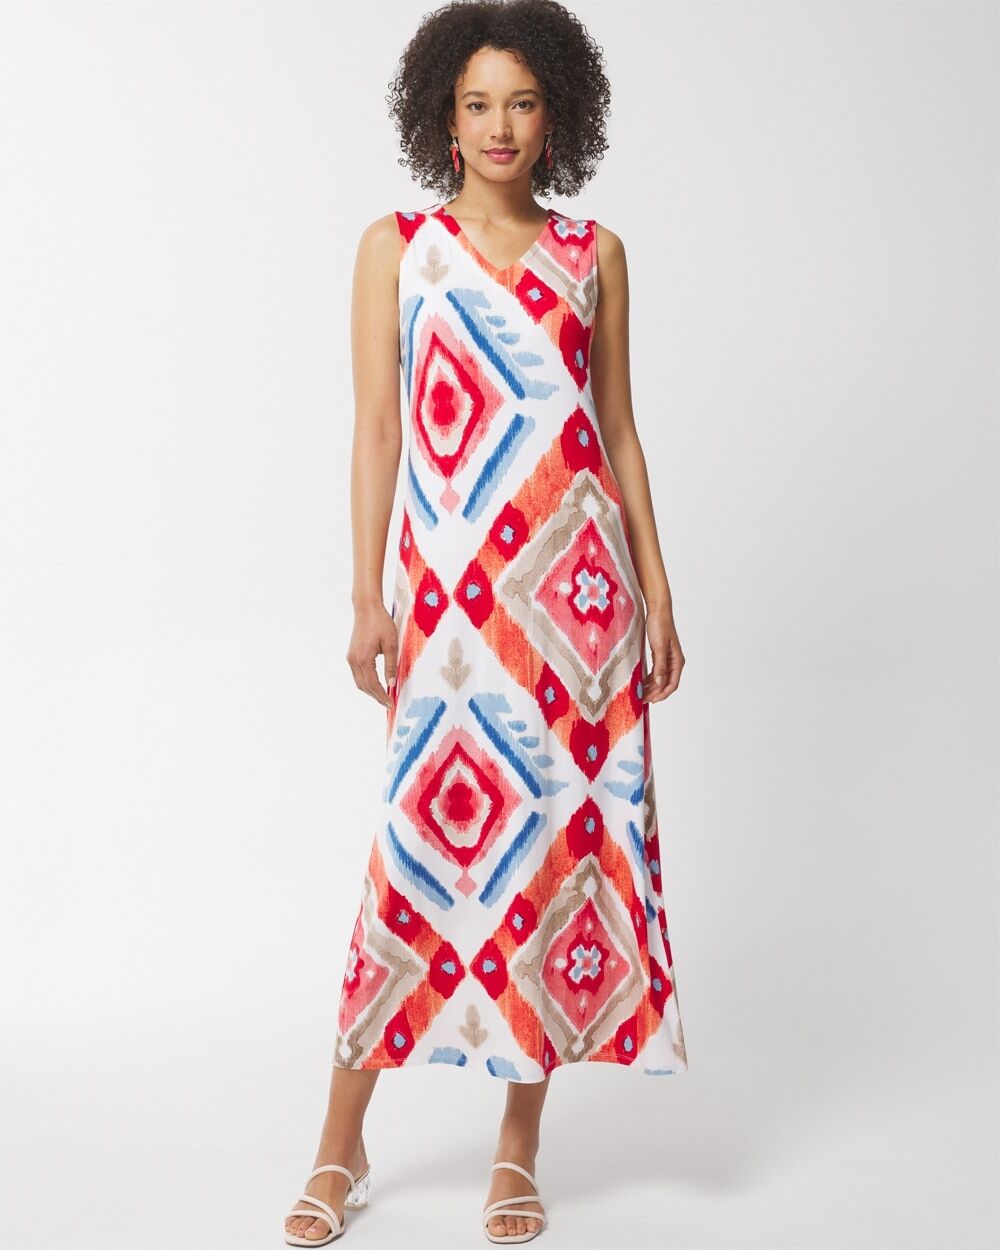 Chico's Off The Rack Women's Exploded Ikat Maxi Dress in Hot Pepper Size 8/10   Chico's Outlet, Spring Dresses - Hot Pepper - Women - Size: 8/10